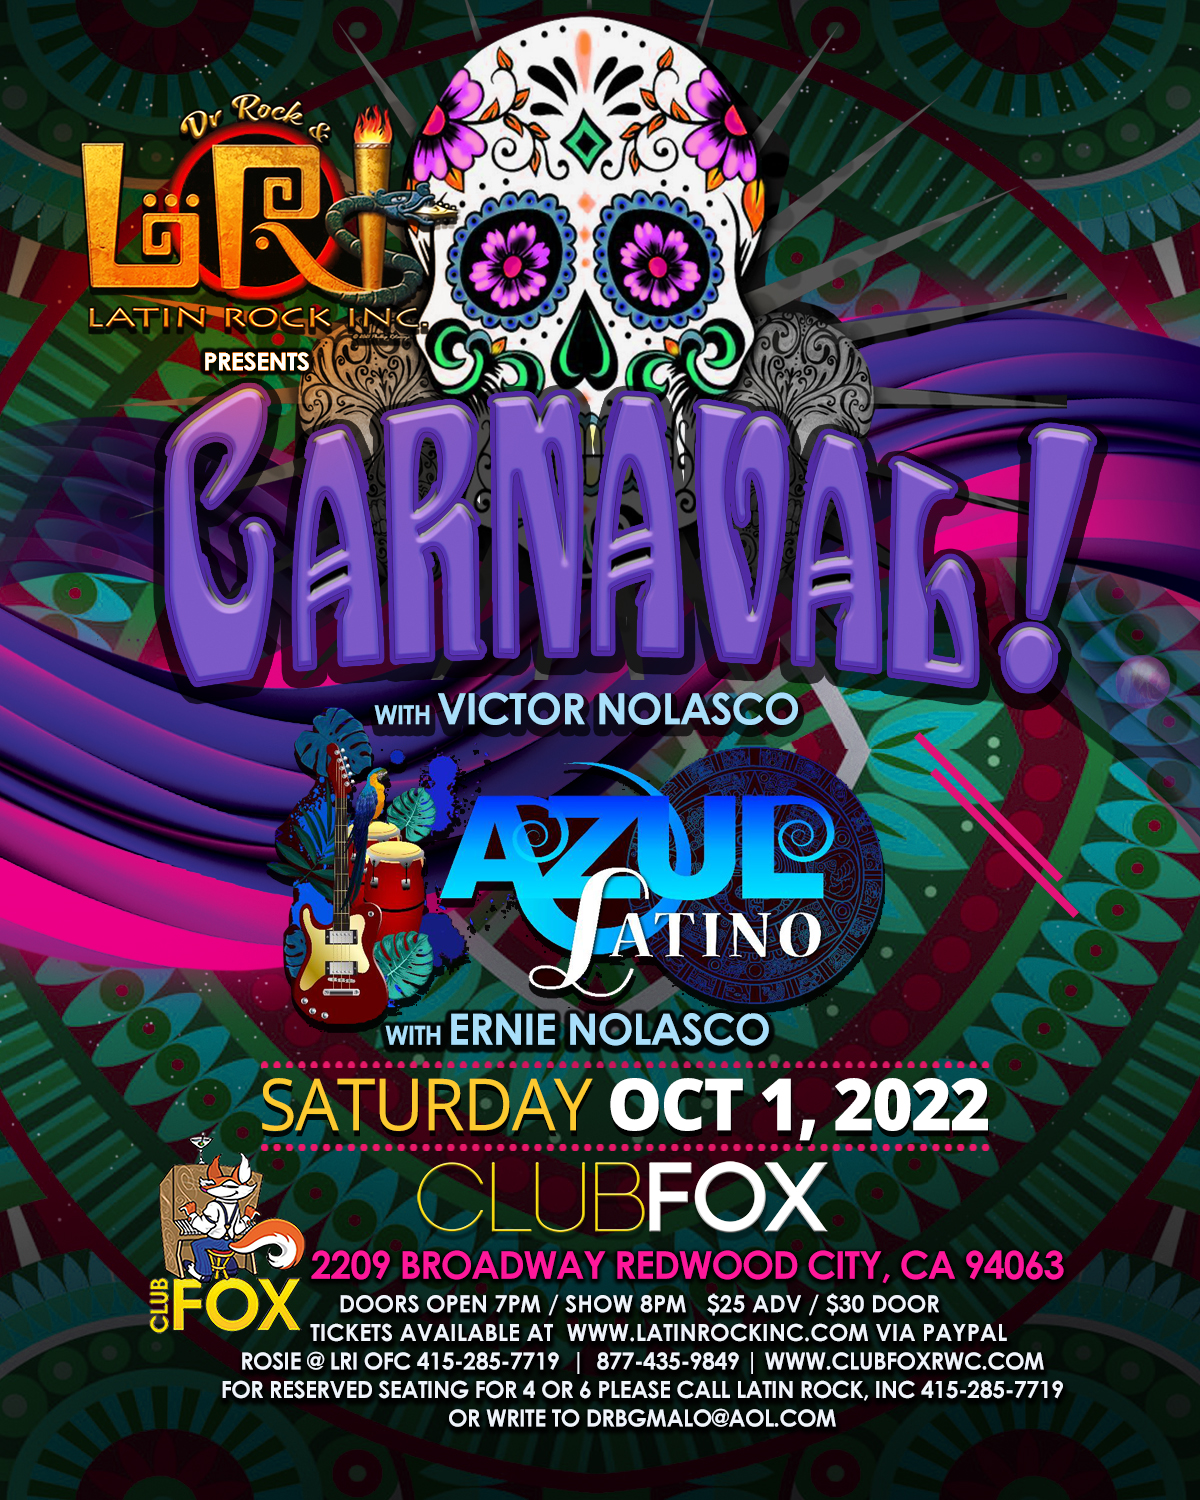 Carnaval and Azul Latino concert poster